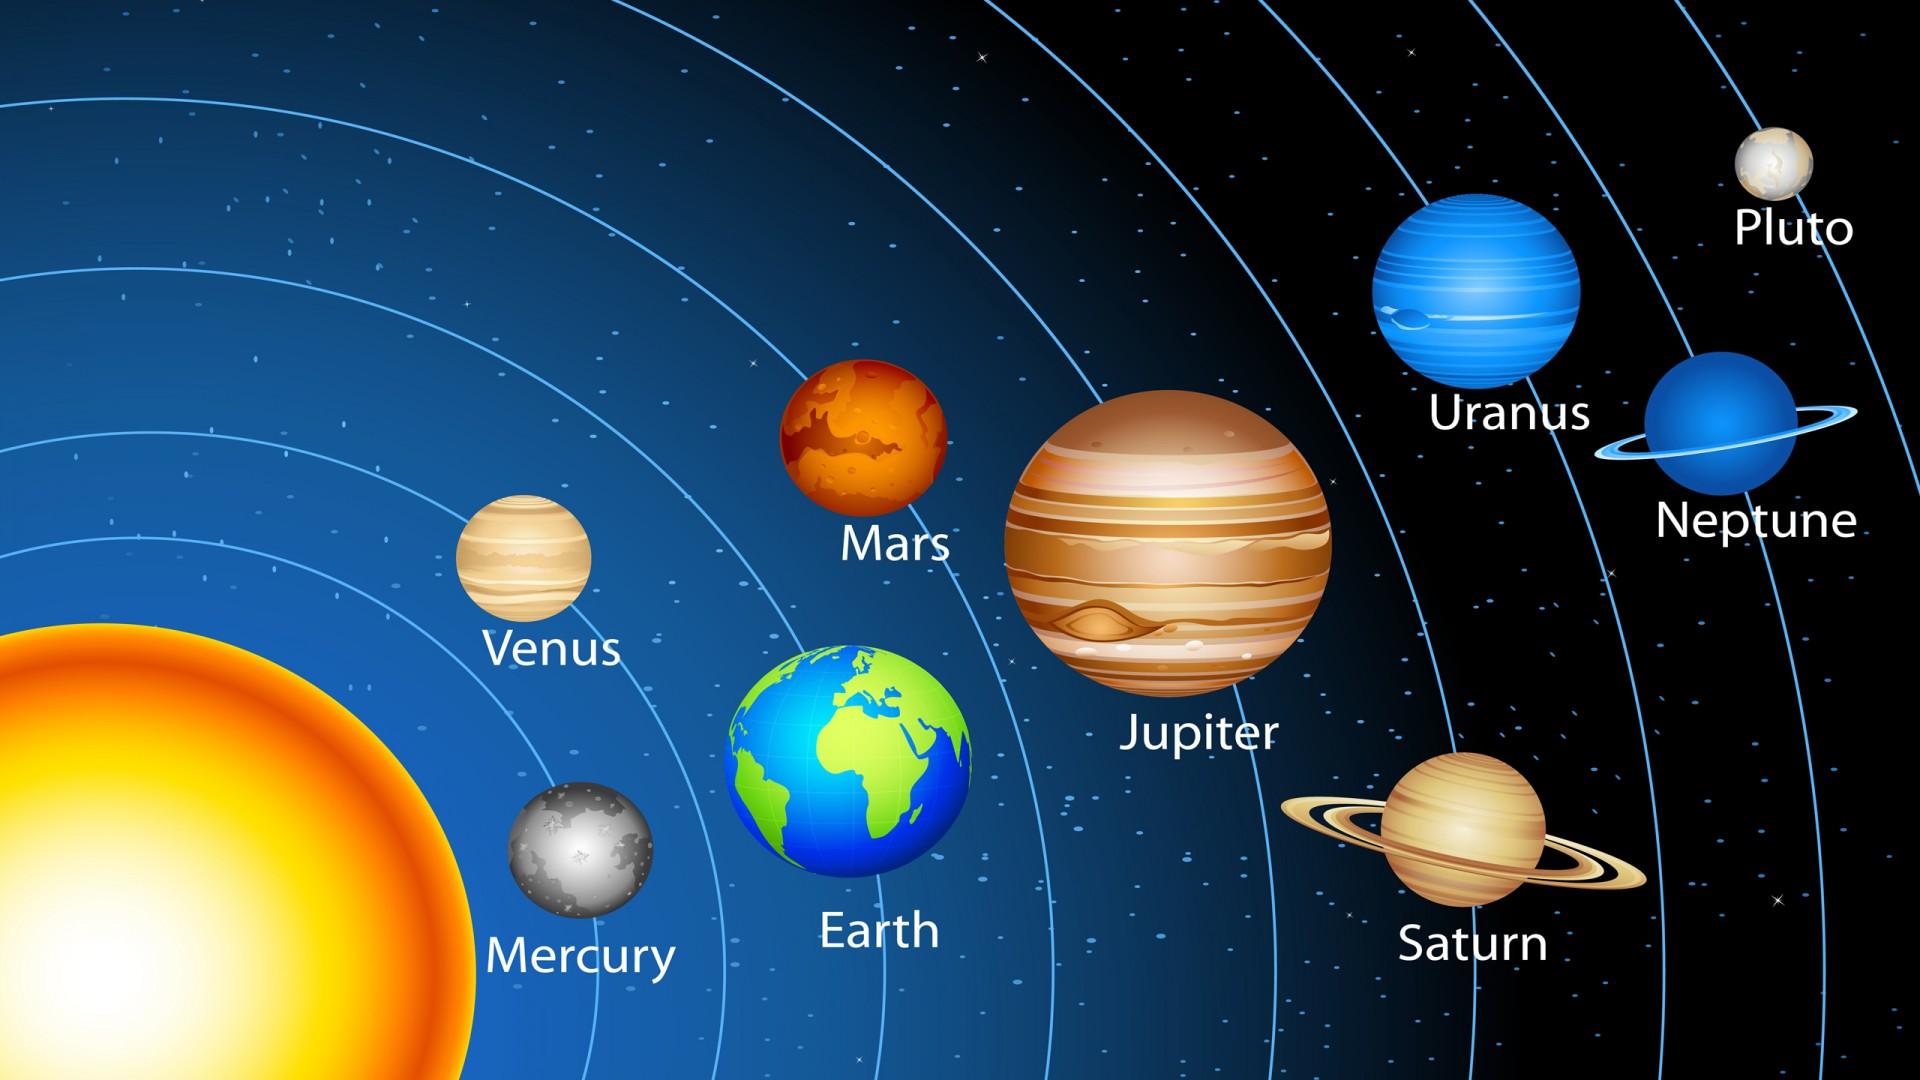 Moving Solar System Wallpapers - Top Free Moving Solar System